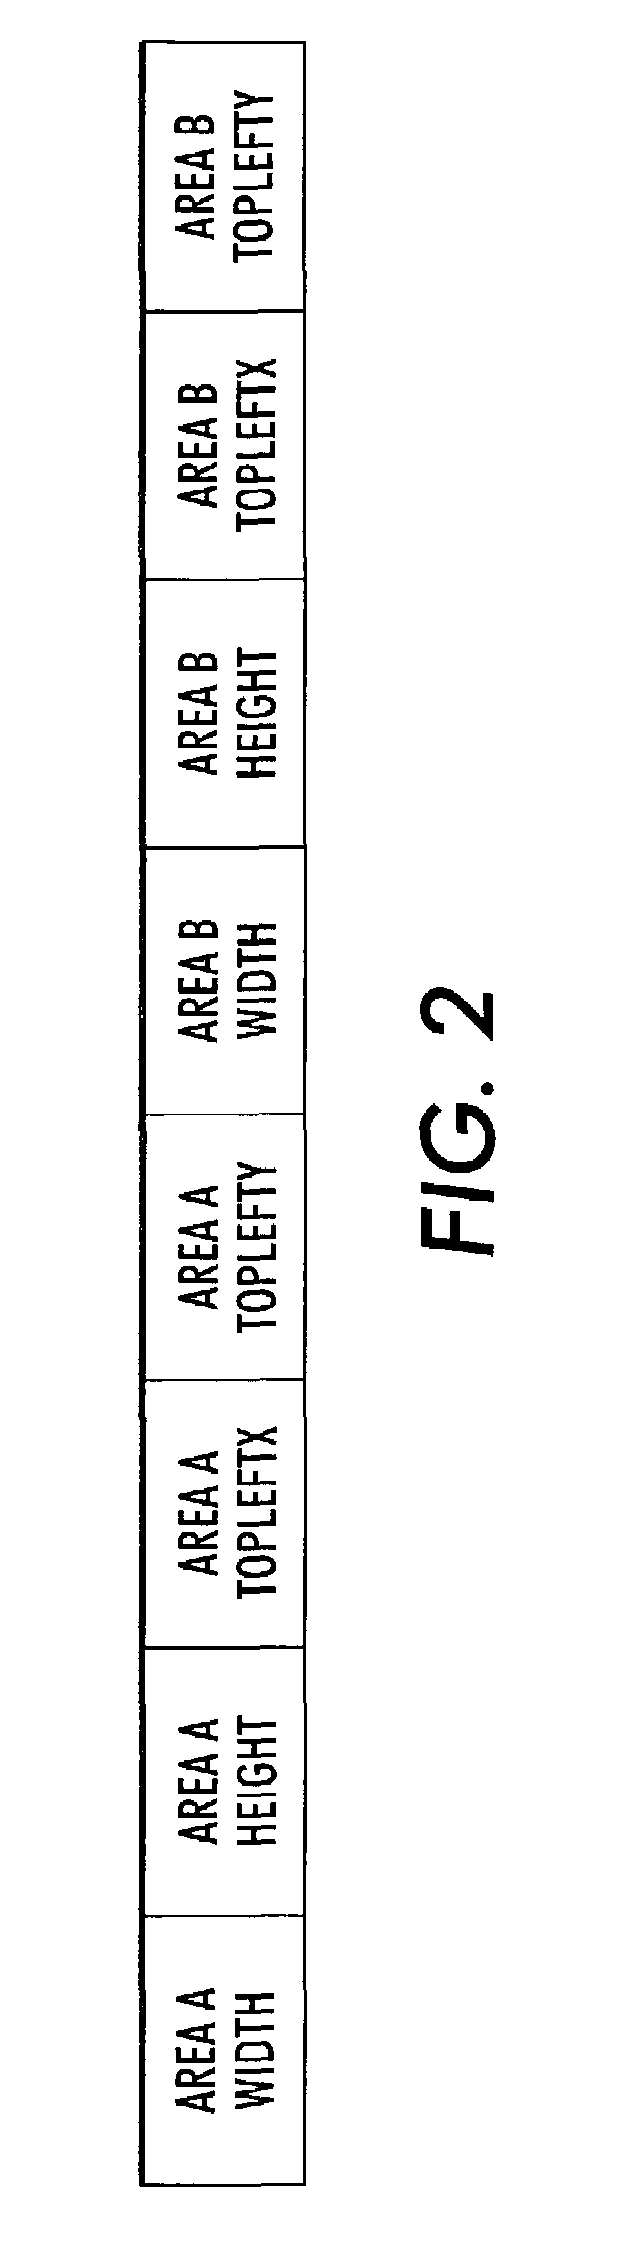 Constraint-optimization system and method for document component layout generation